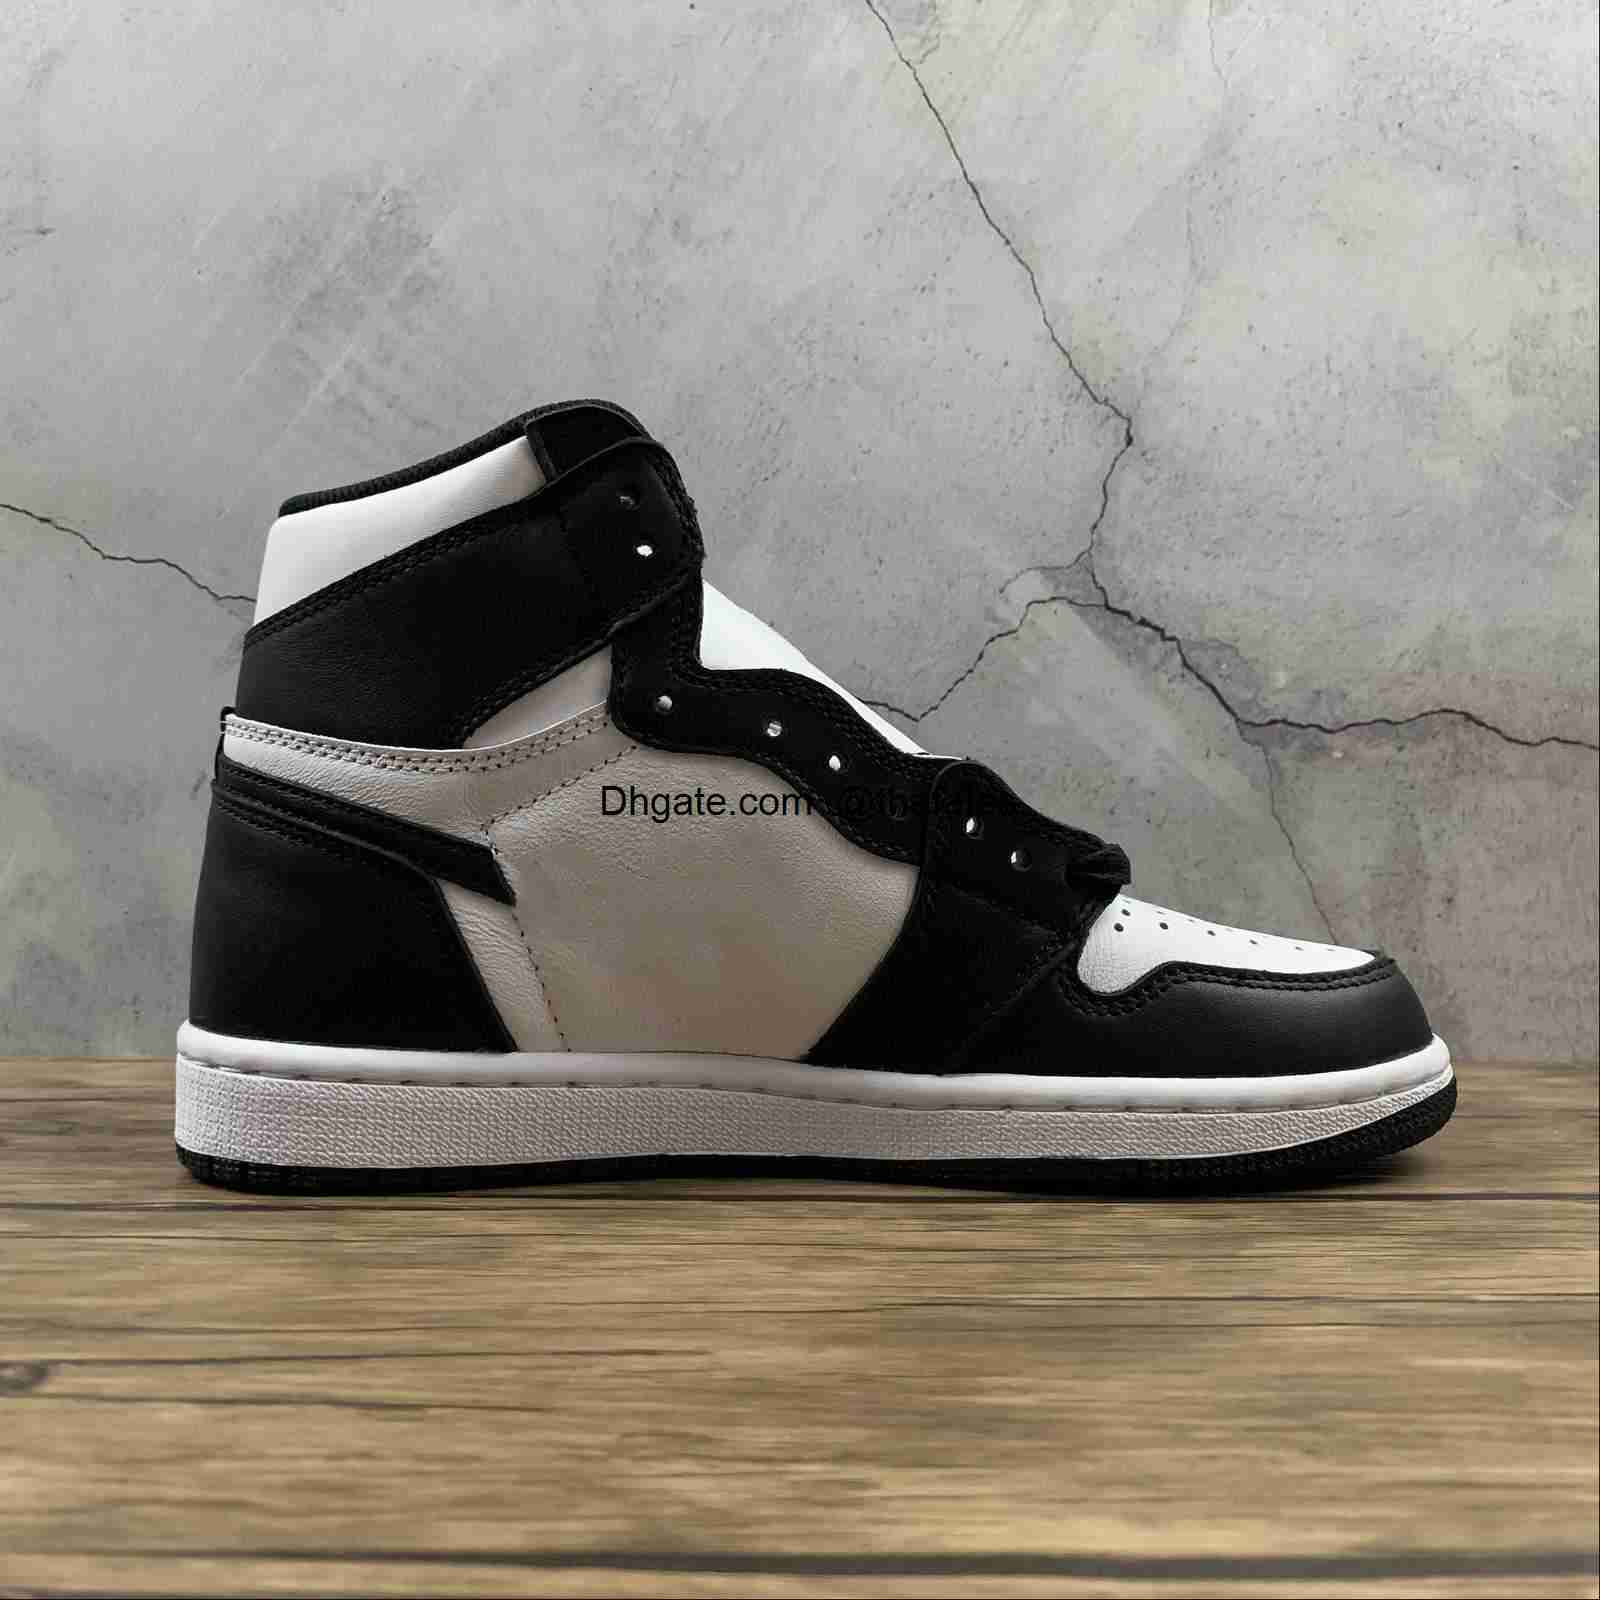 

High Original 1 Classical Jumpman Black White Designer Men Women Basketball Shoes Top Quality Sports Shoes Outdoor Sneakers With Box and Fast Delivery